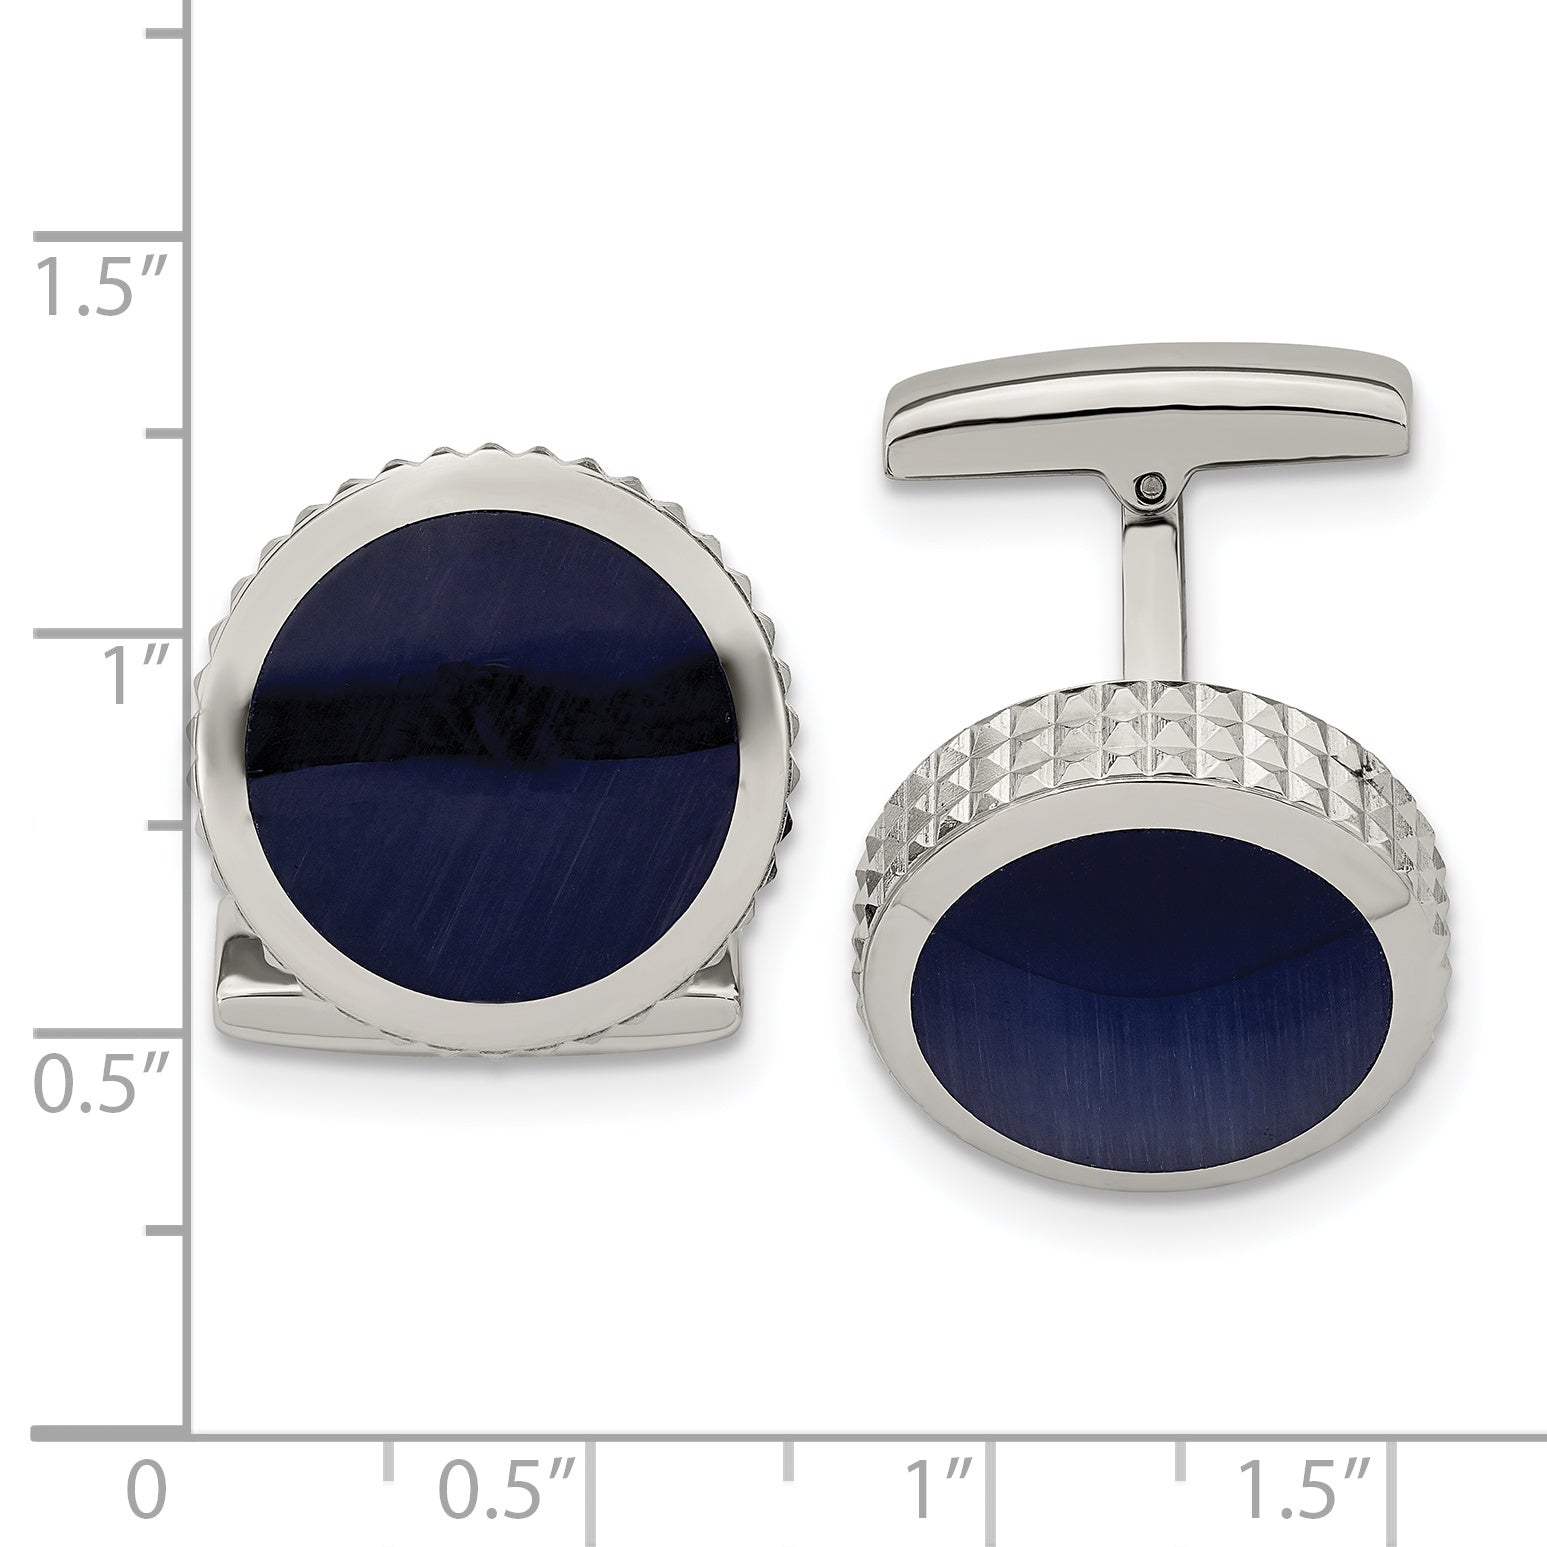 Chisel Stainless Steel Polished Blue Cat's Eye Textured Edge Circle Cufflinks